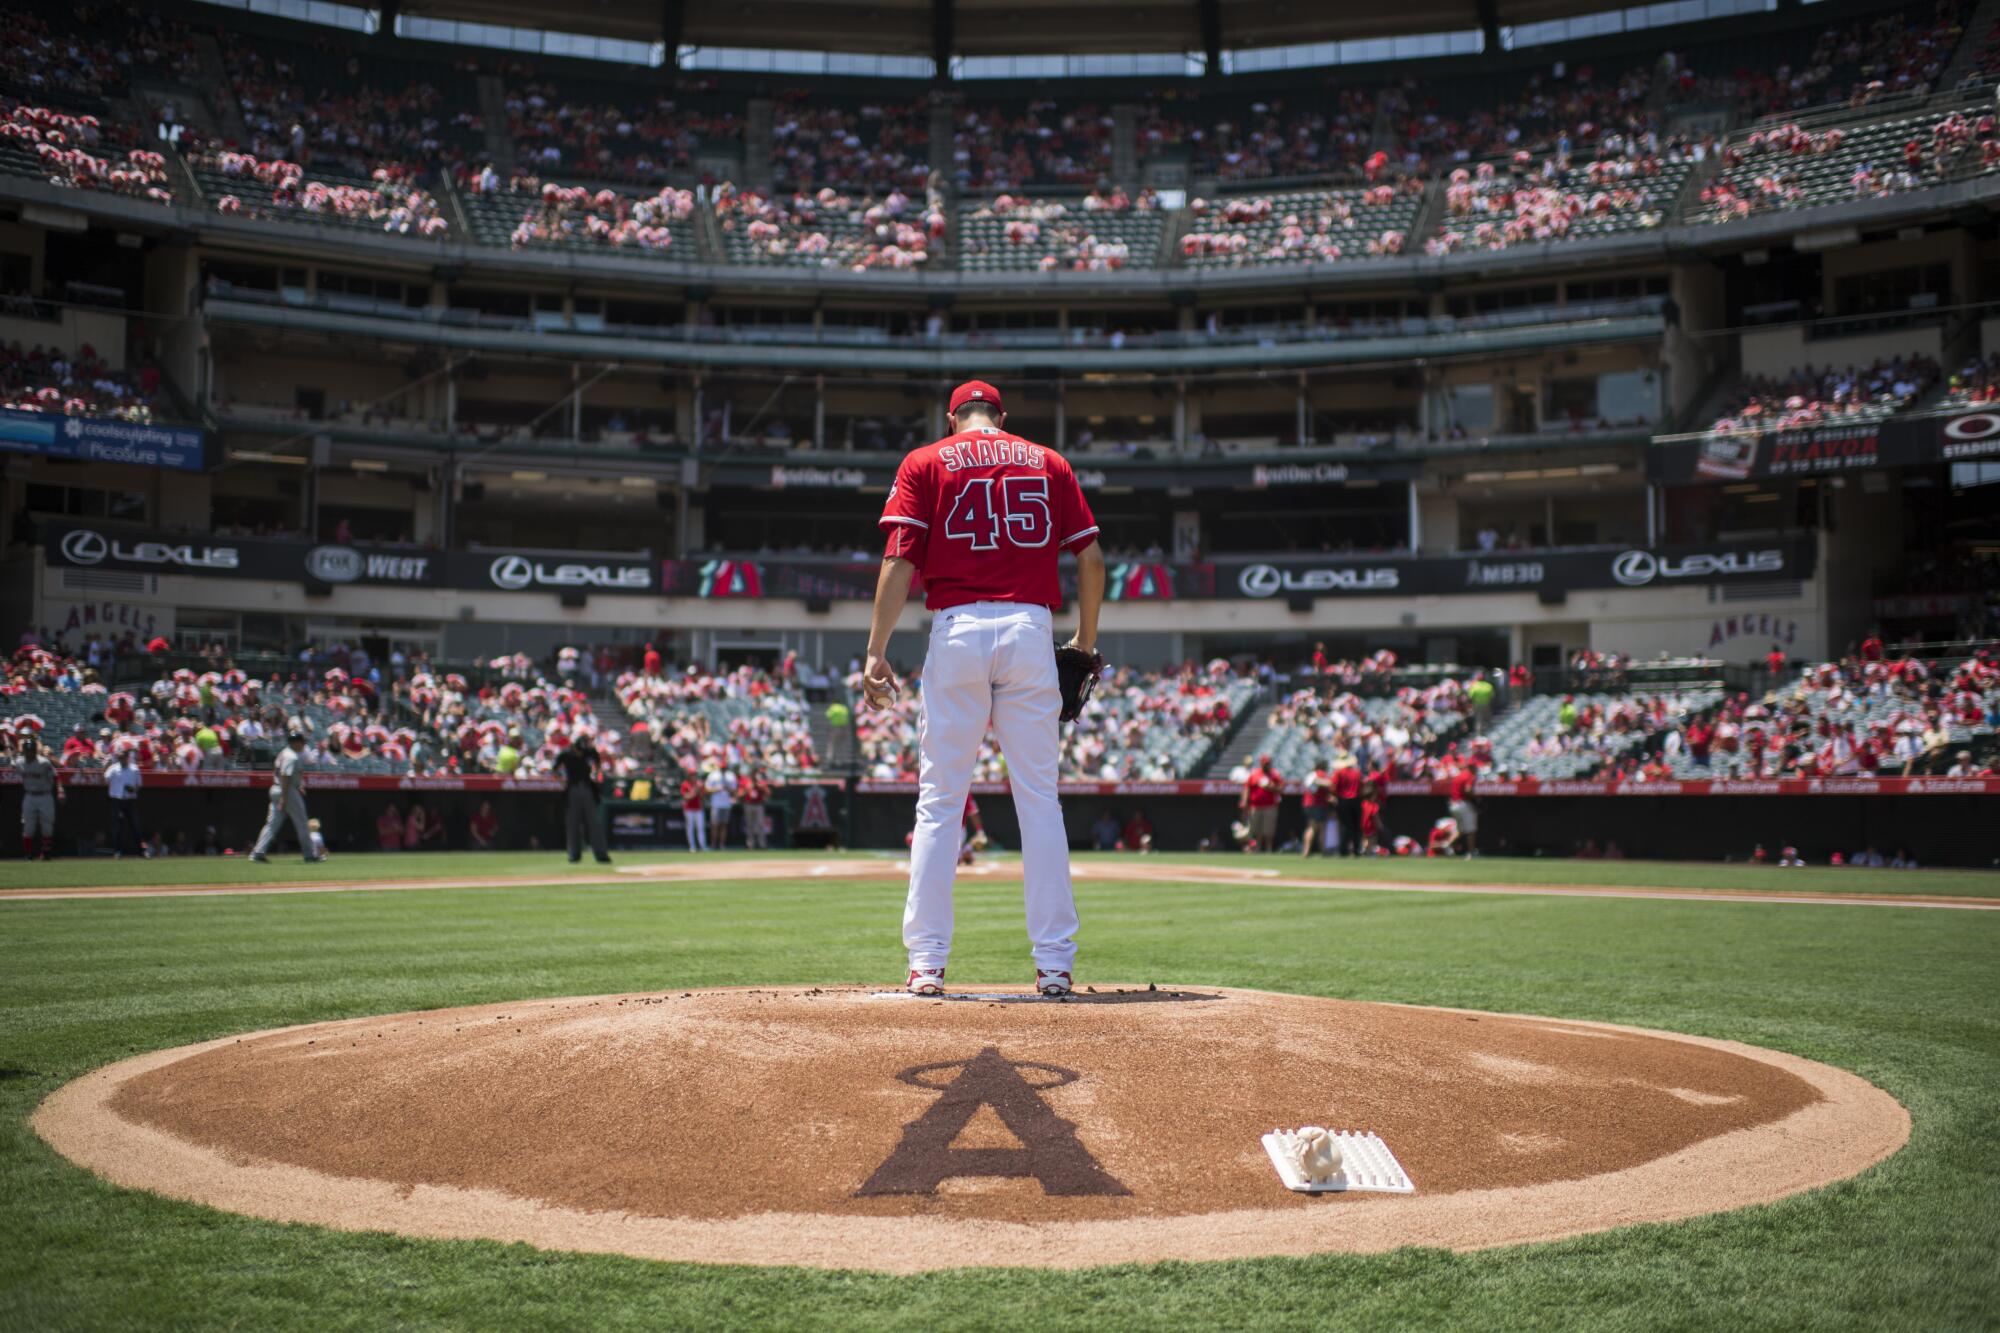 The late pitcher Tyler Skaggs stands on the mound in red jersey, No. 45, before a 2016 game at Angel Stadium